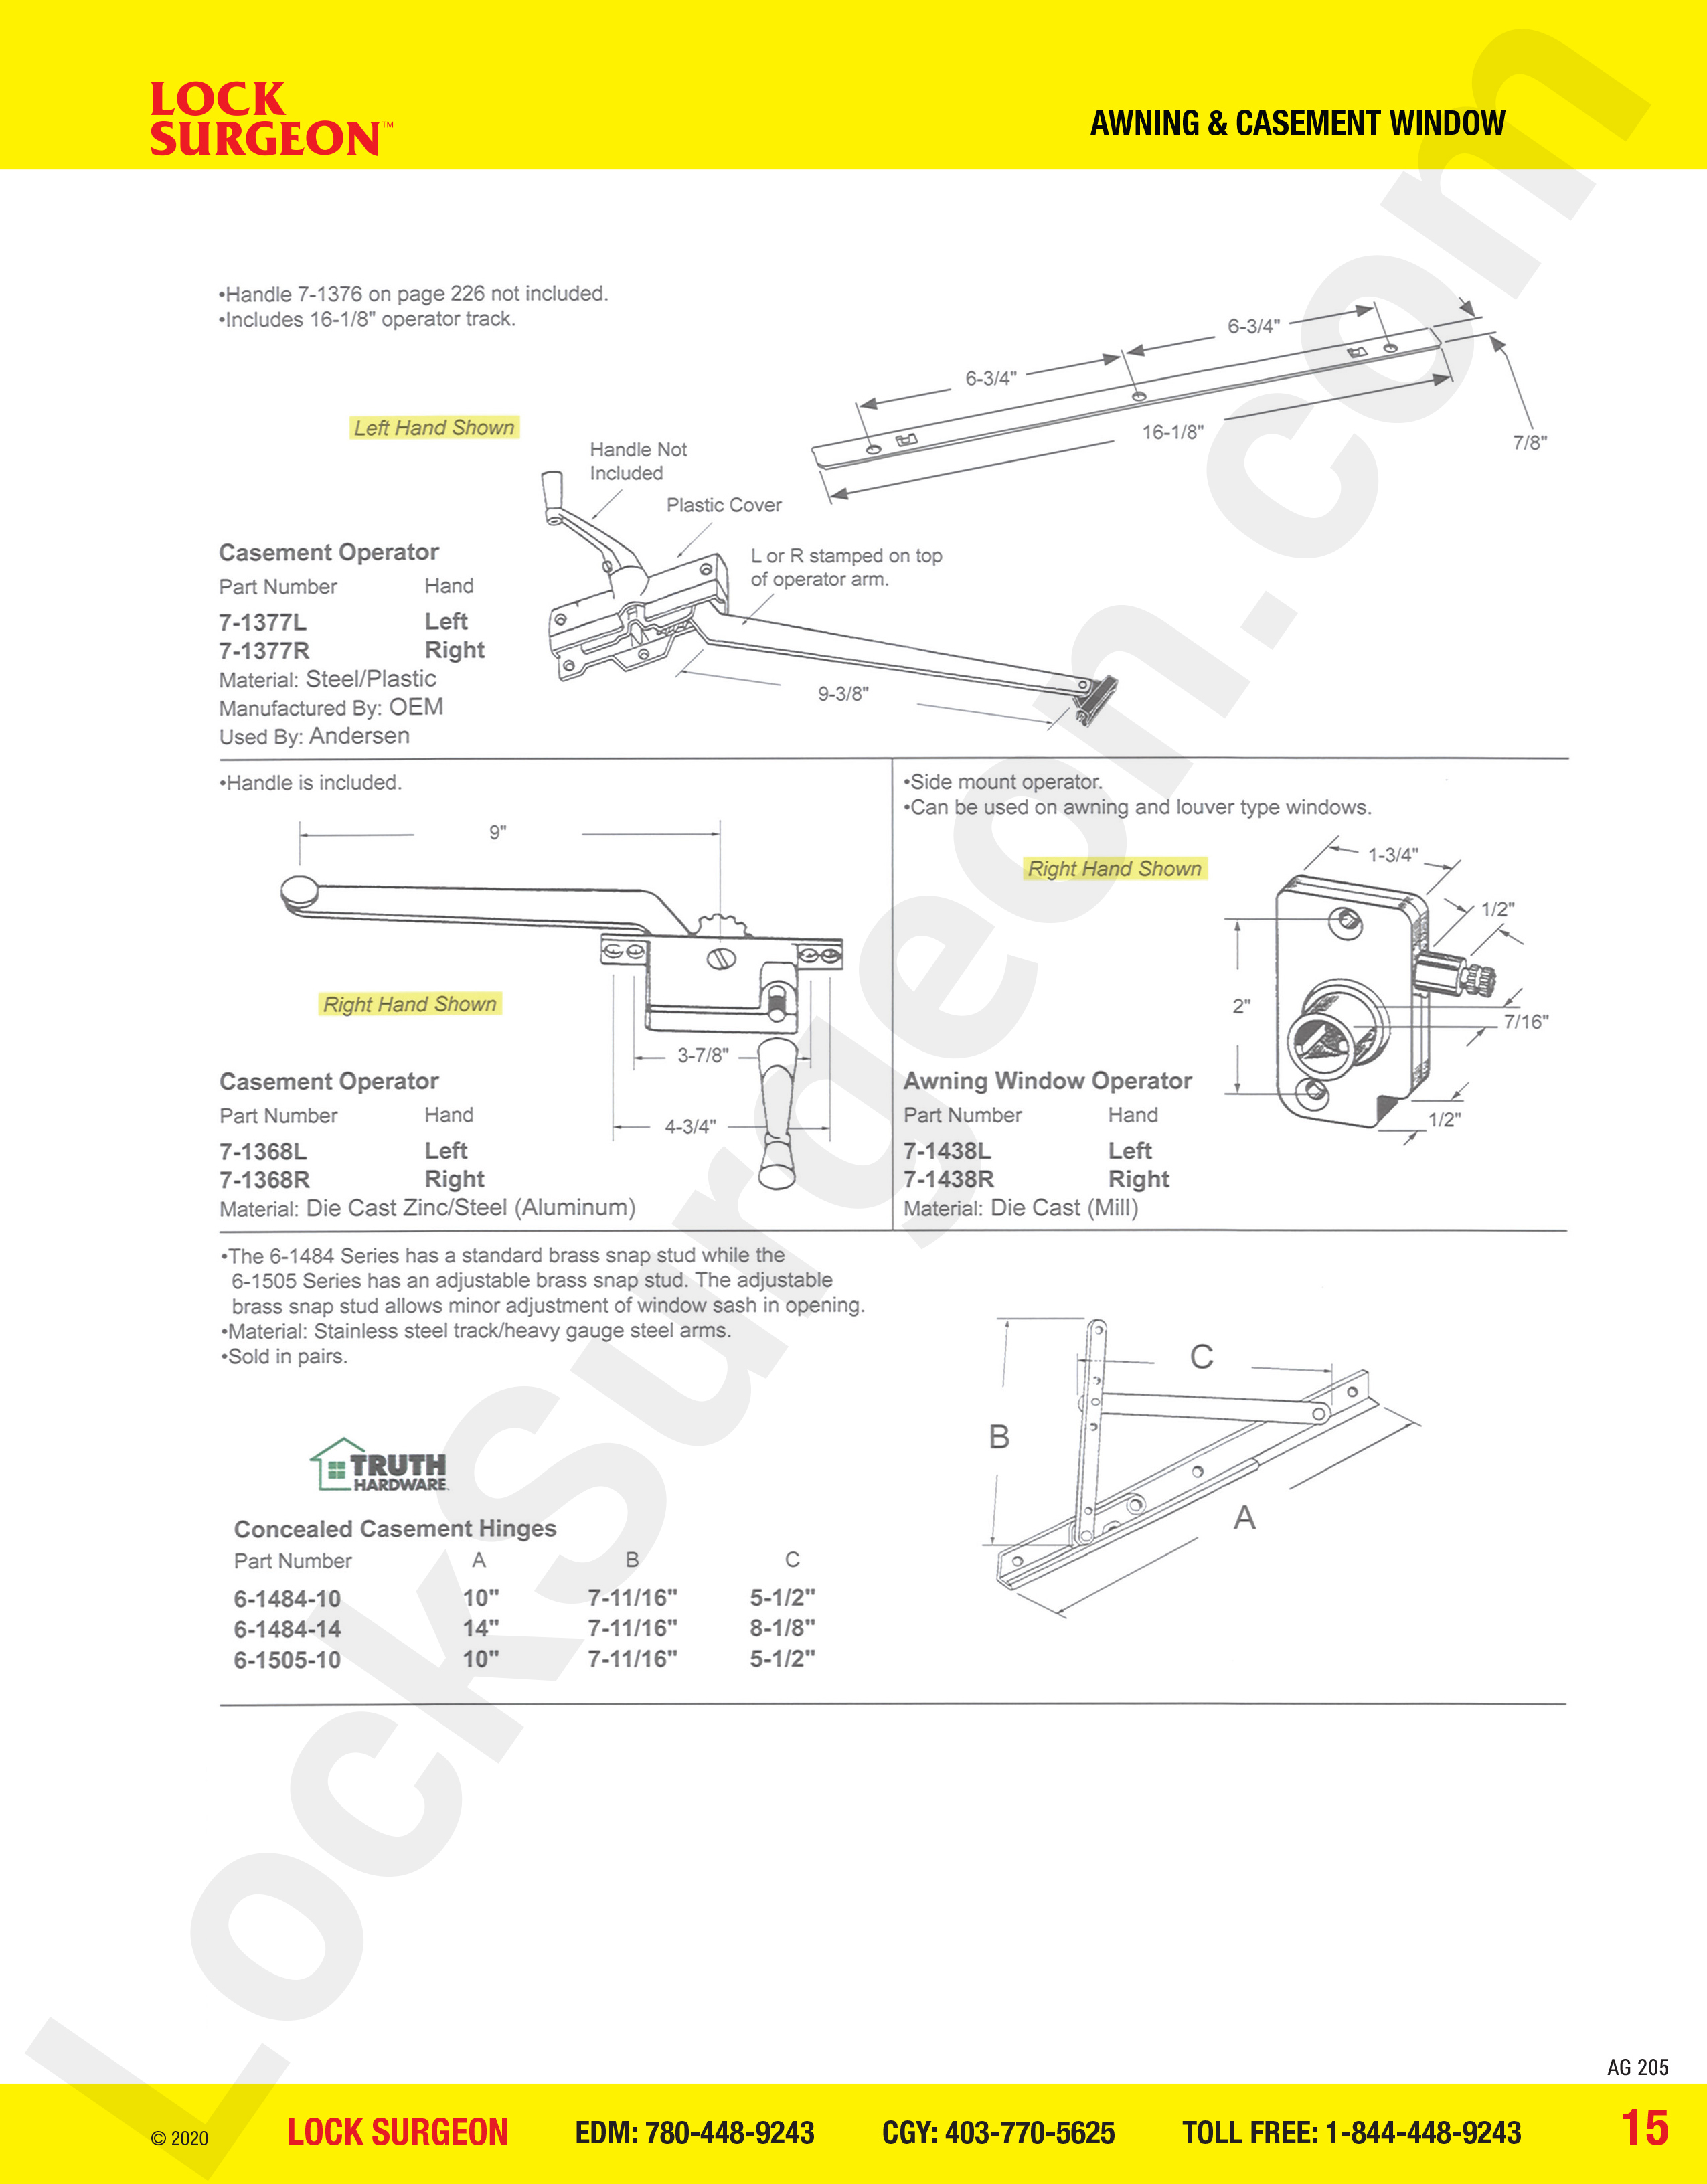 Acheson mobile awning and casement window parts for operators